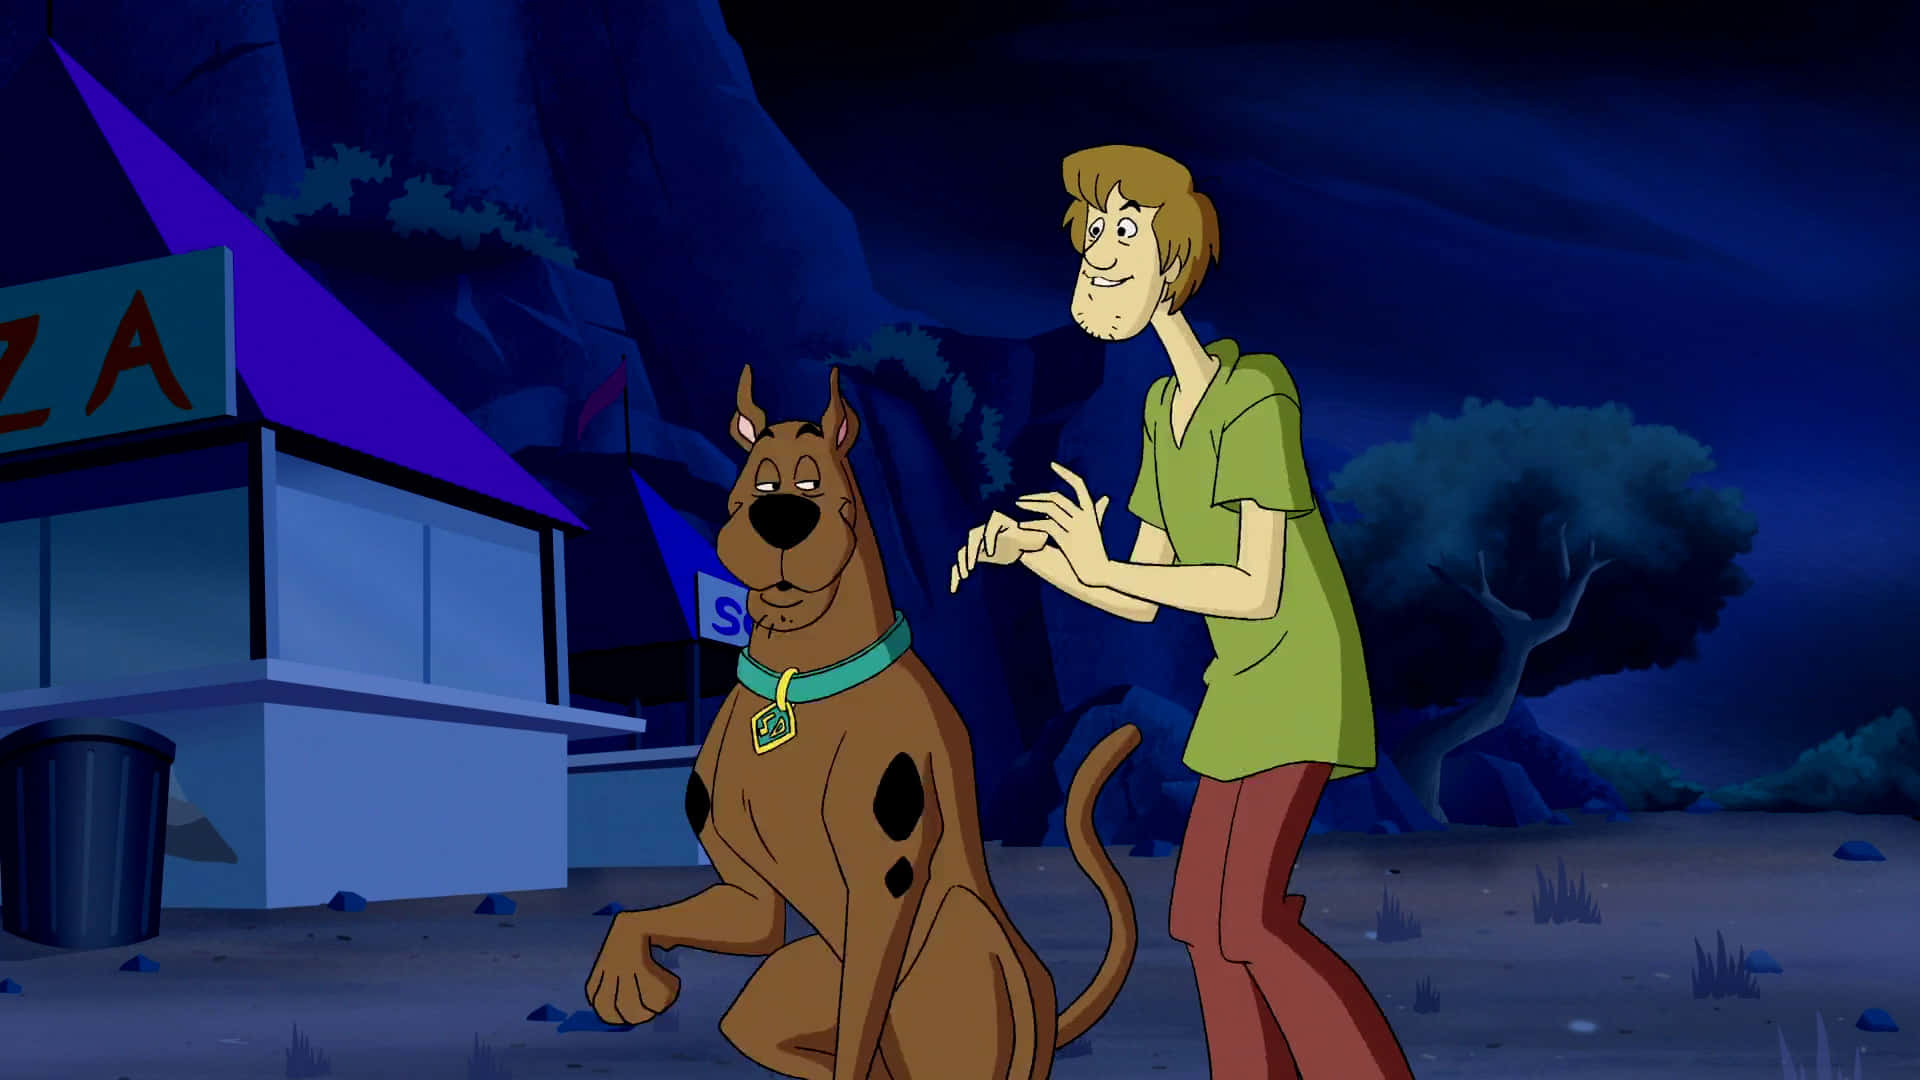 Scooby Doo And His Dog In The Cartoon